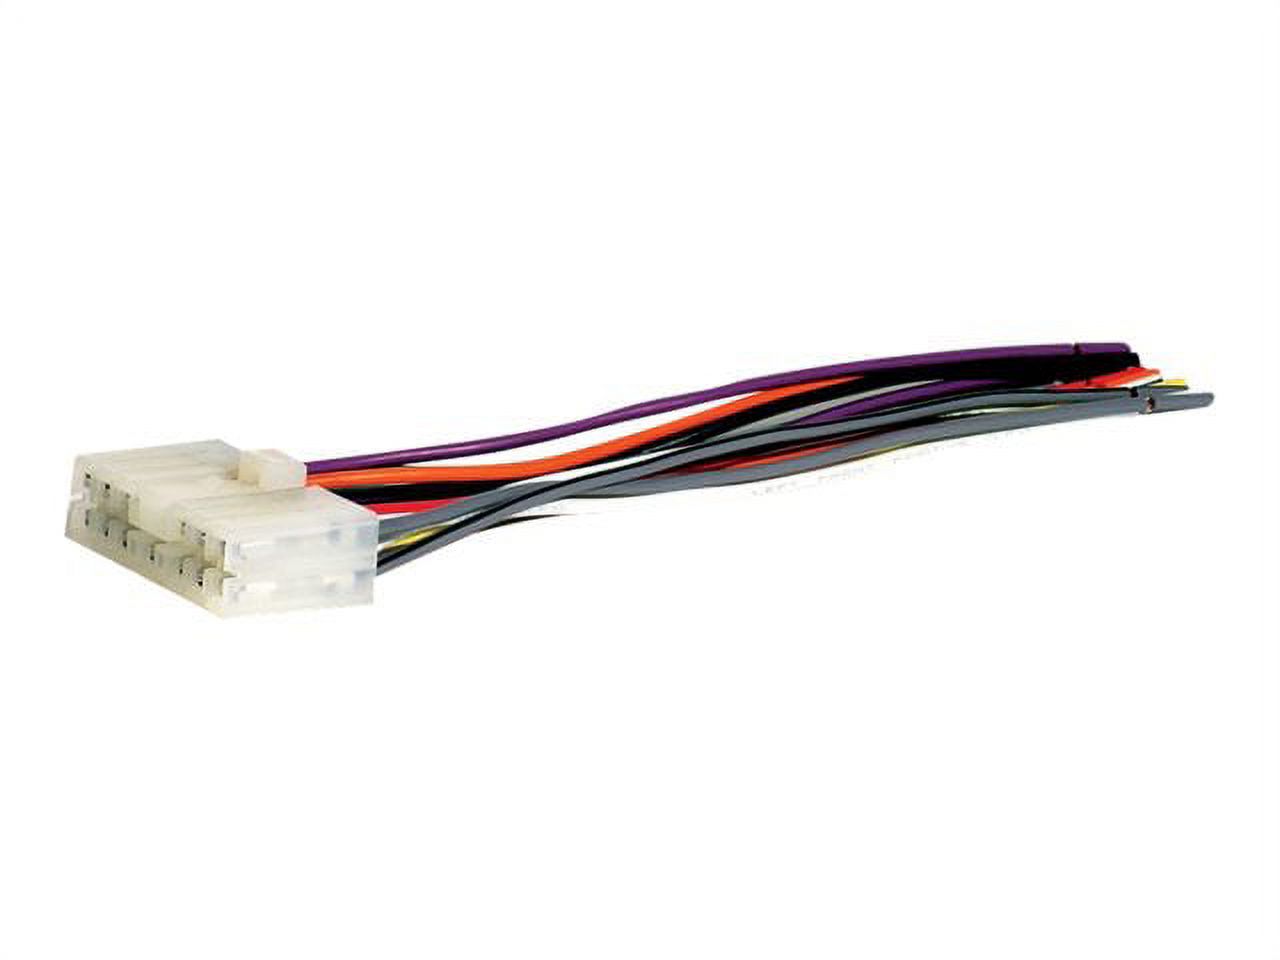 SCOSCHE IM01RB- 1974-1999 Universal Import Speaker Wire Harness / Connector for Car Radio / Stereo Installation - image 4 of 5